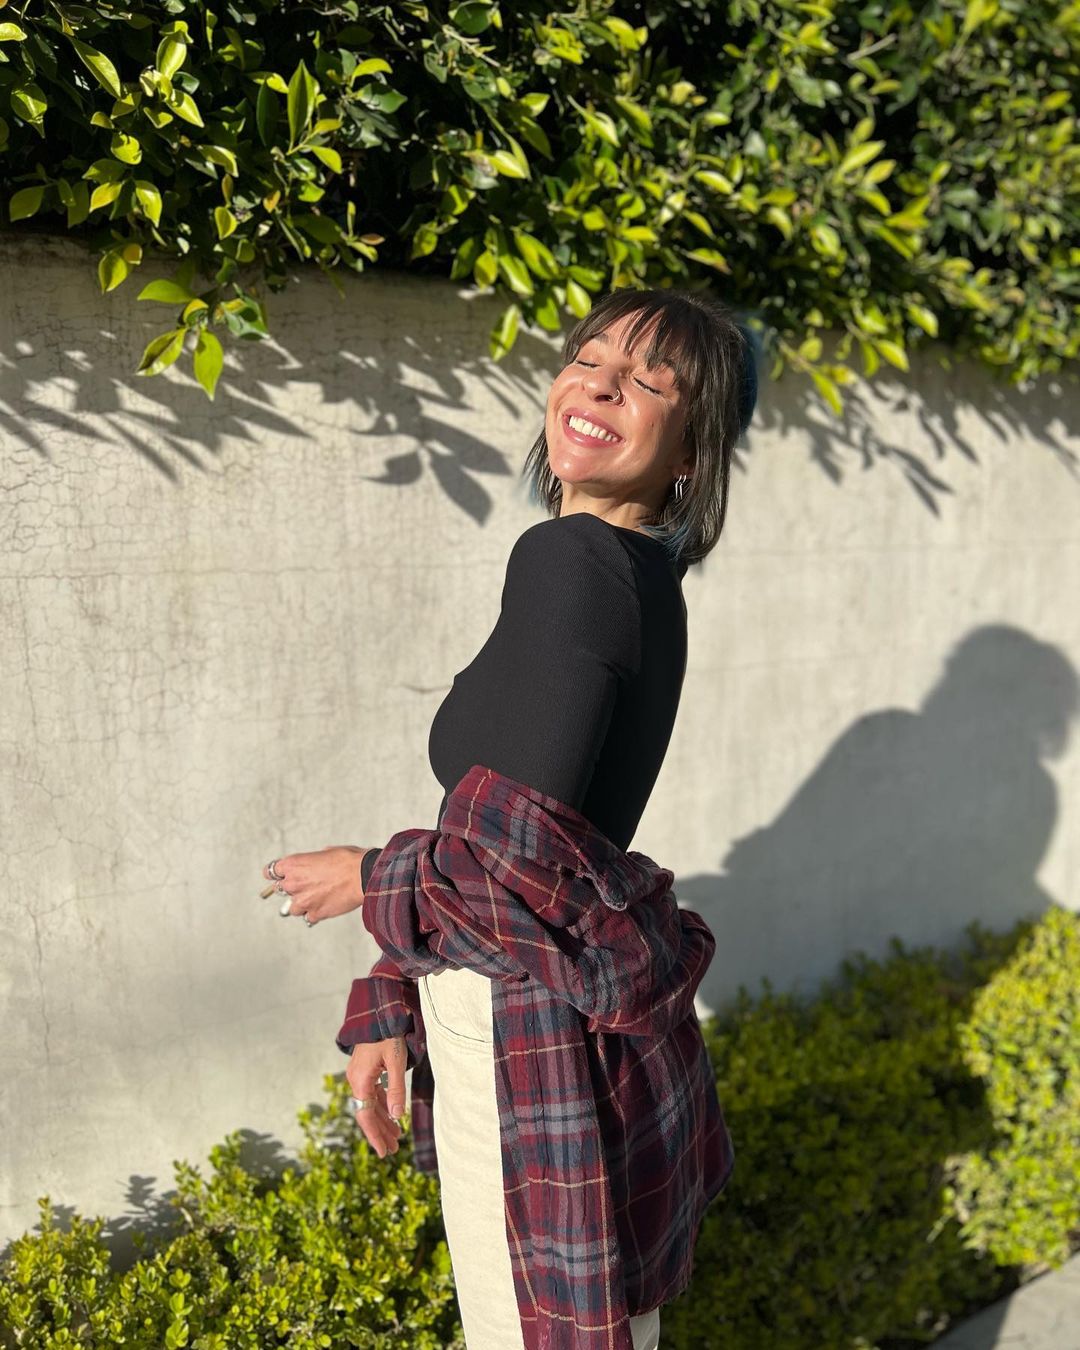 Gabbie Hanna is now working as a fitness coach in her hometown.